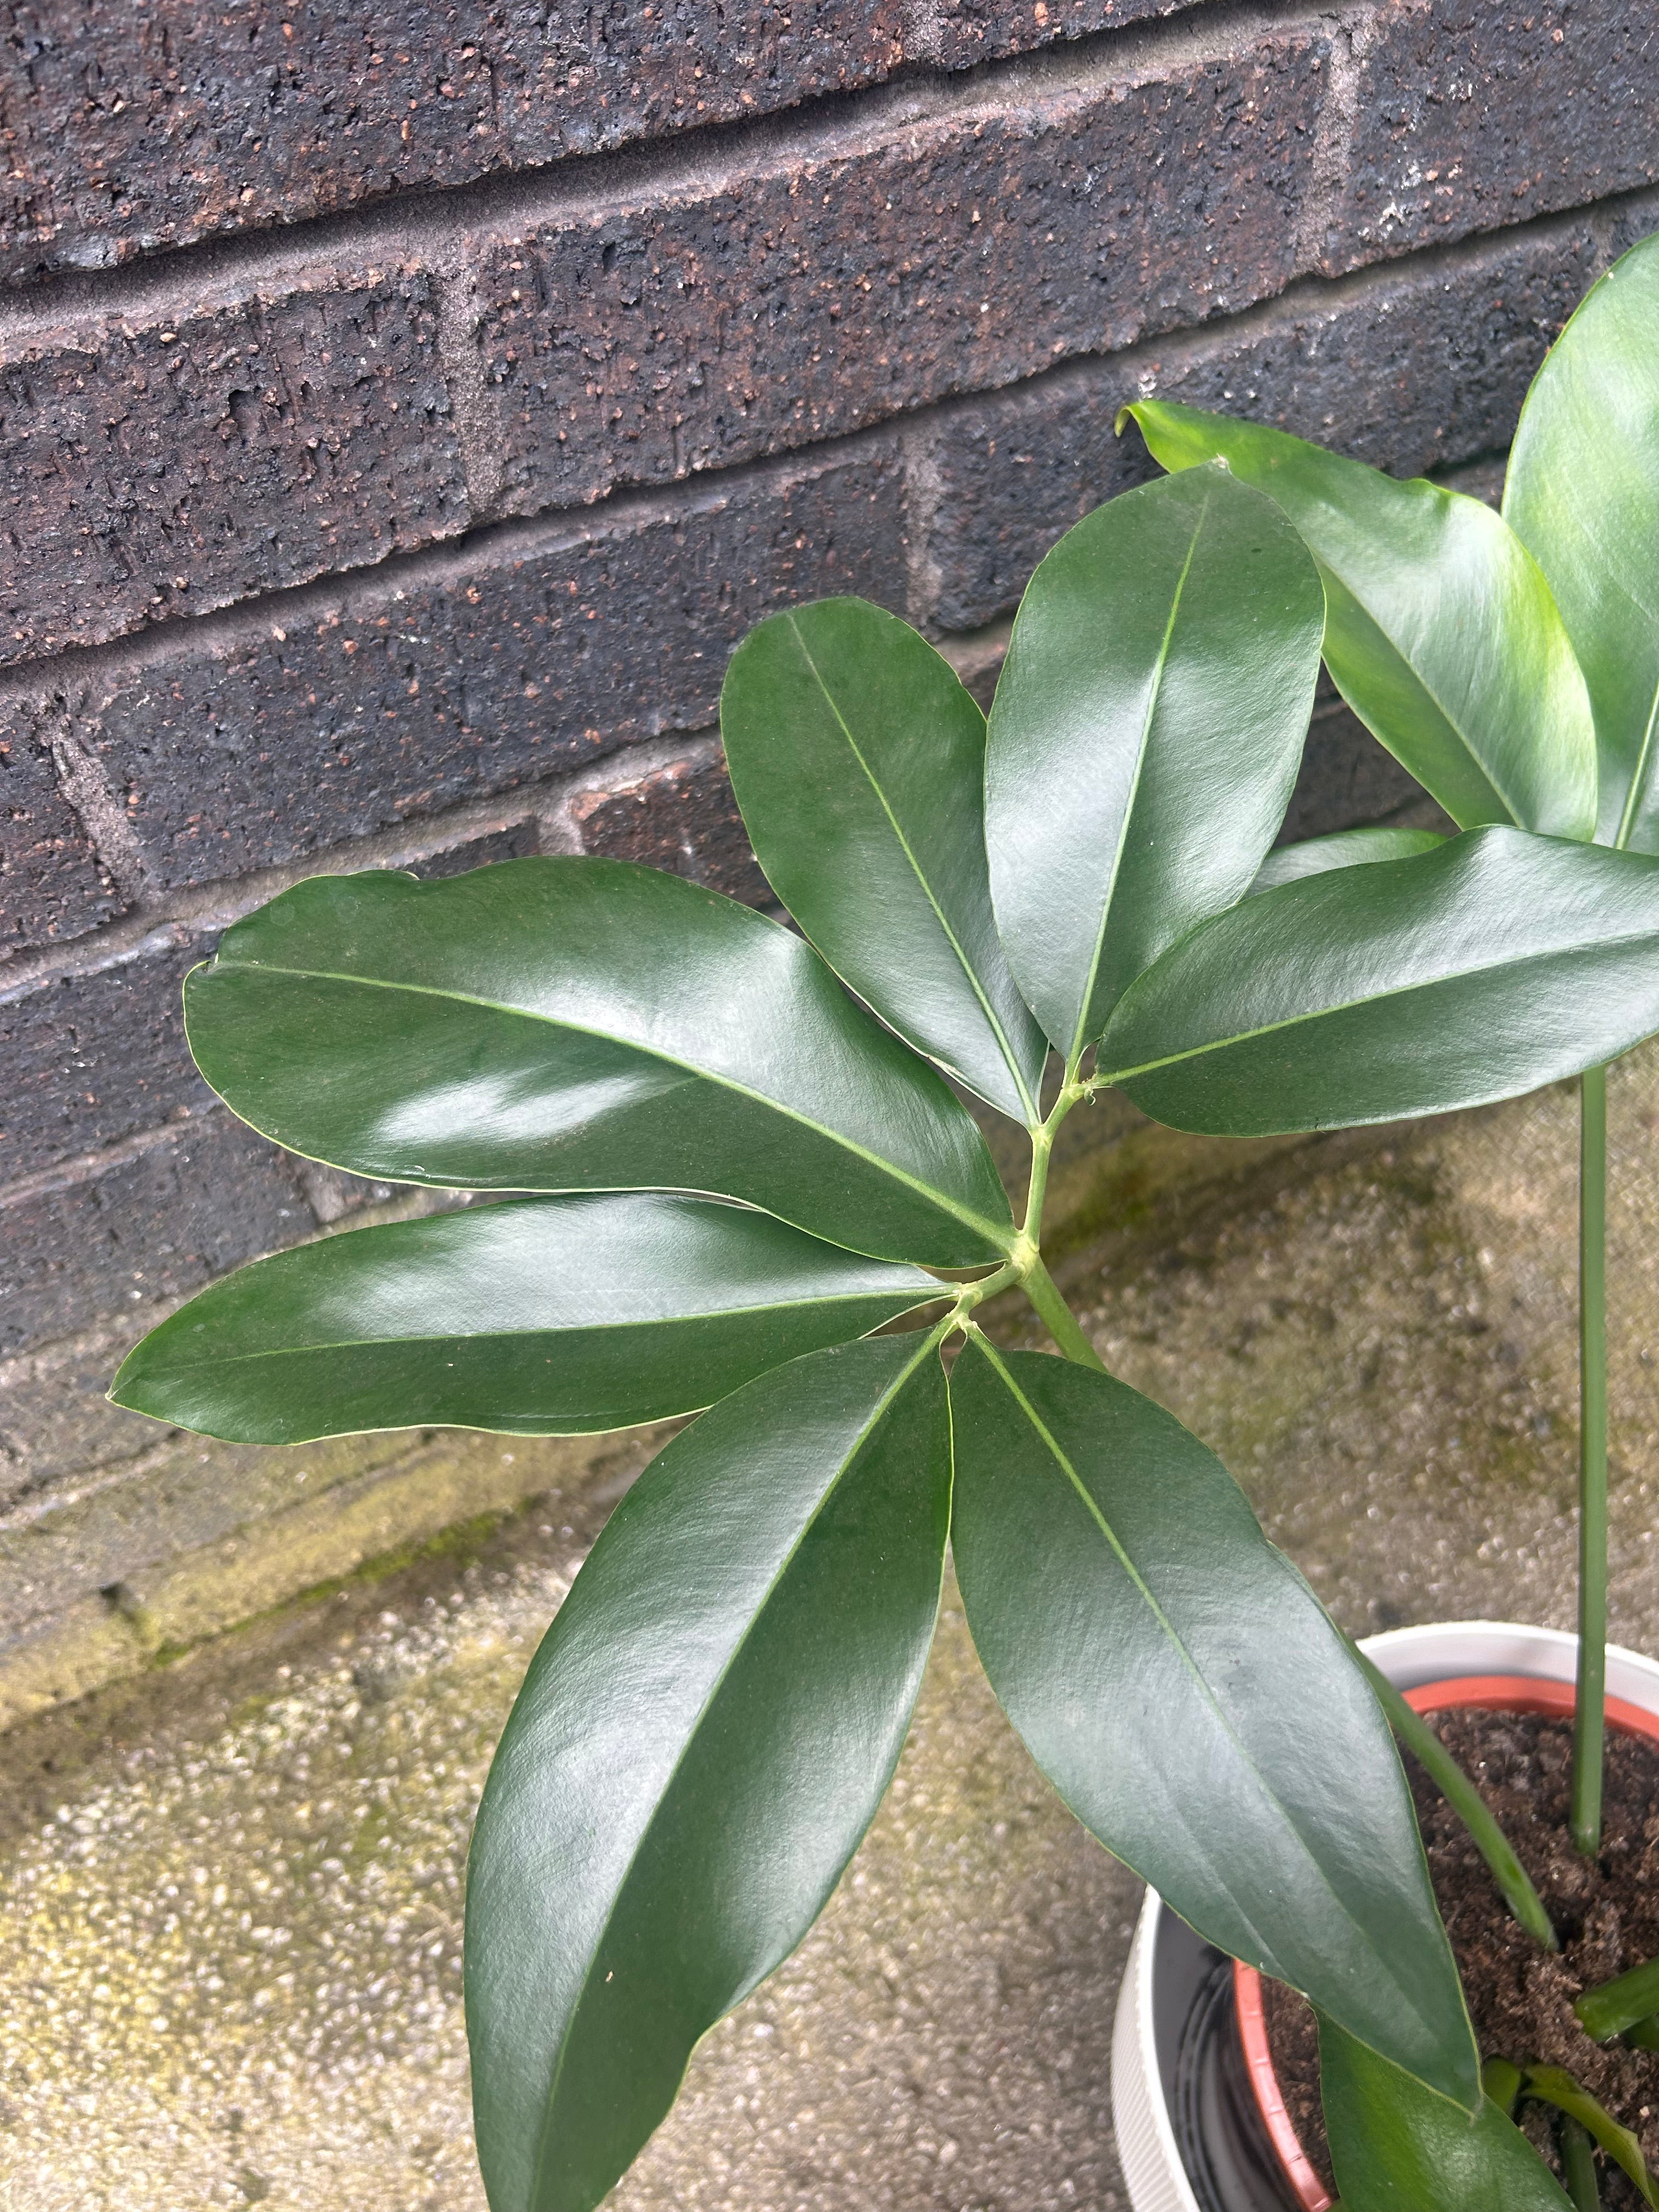 Philodendron Green Wonder